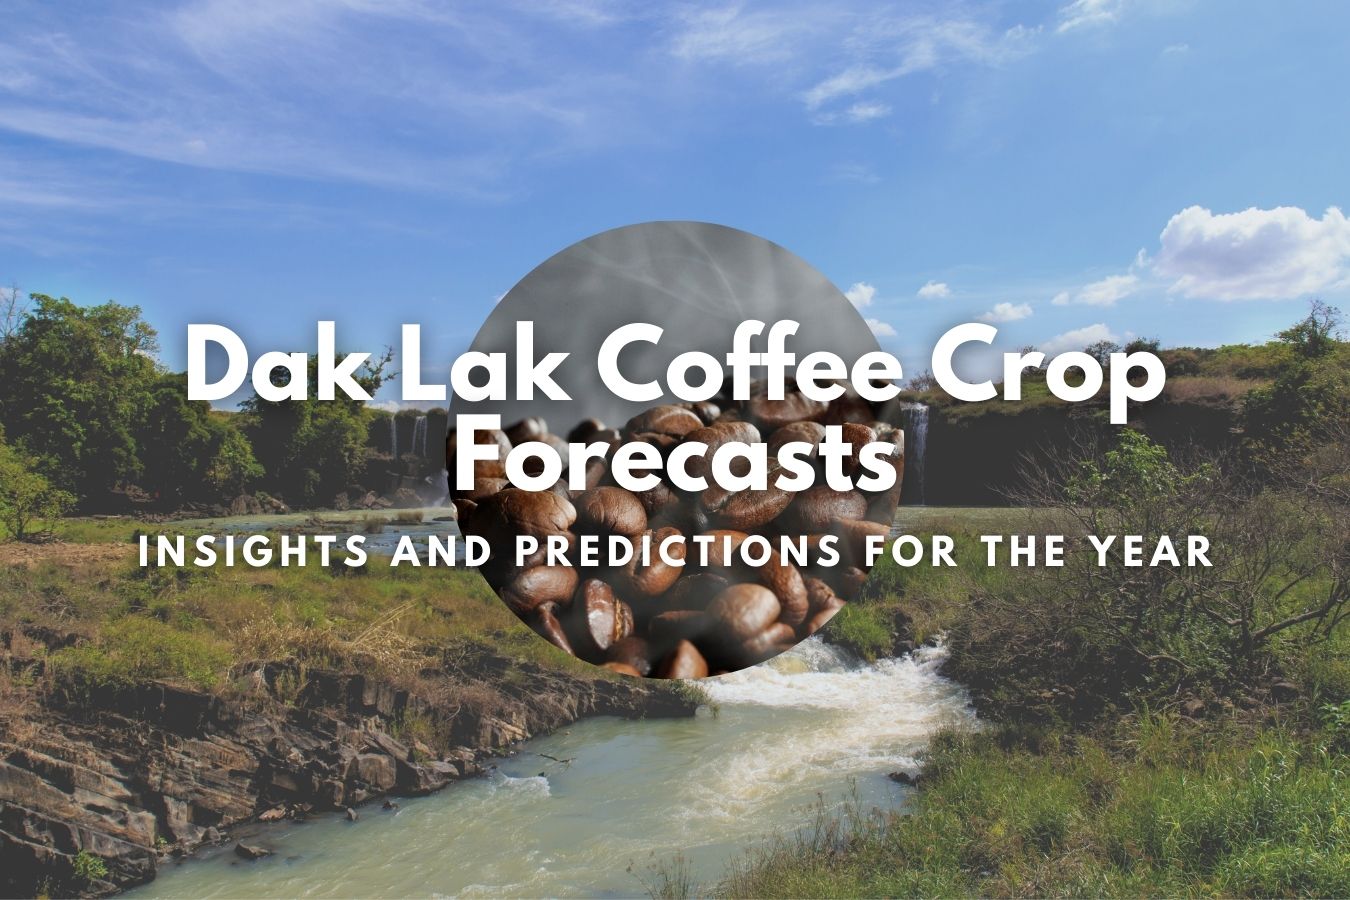 Dak Lak Coffee Crop Forecasts Insights and Predictions for the Year